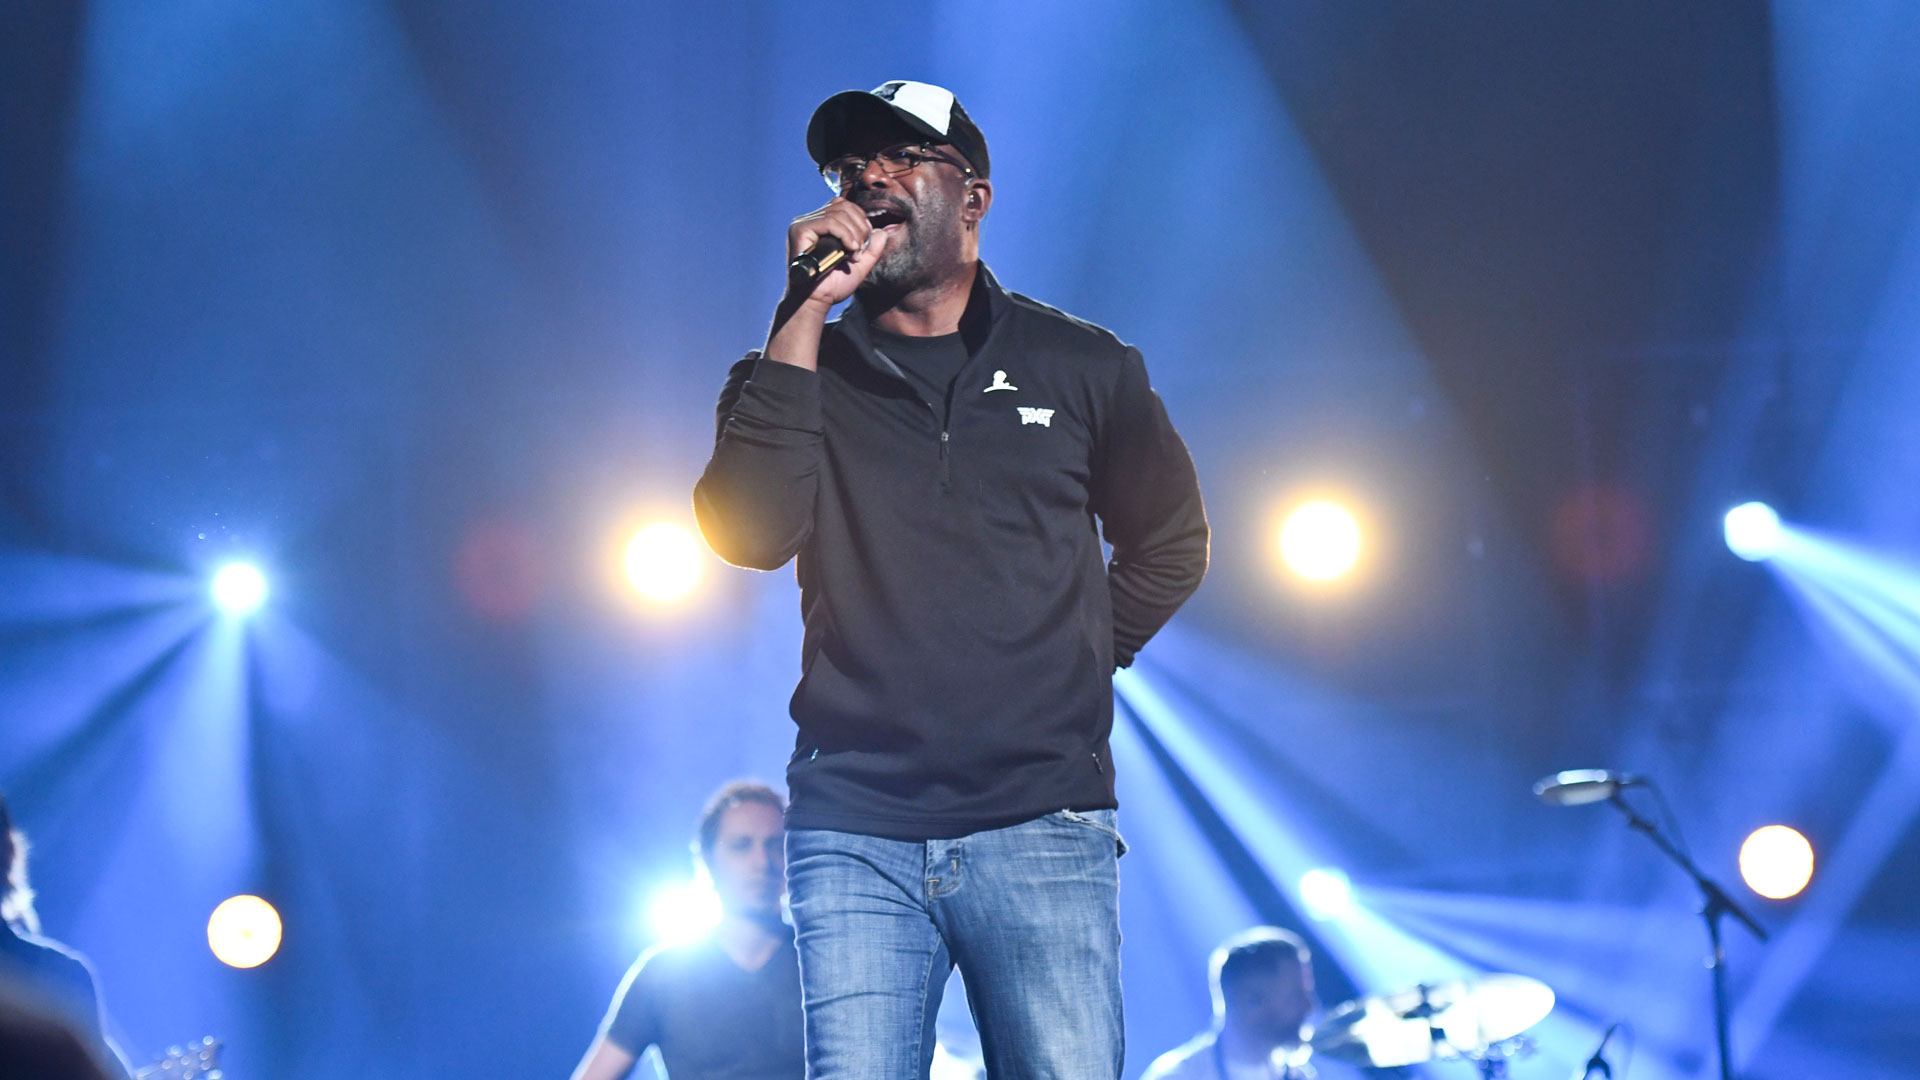 Darius Rucker looks oh-so-cozy while rehearsing his performance at Country Music's Party of the Year.